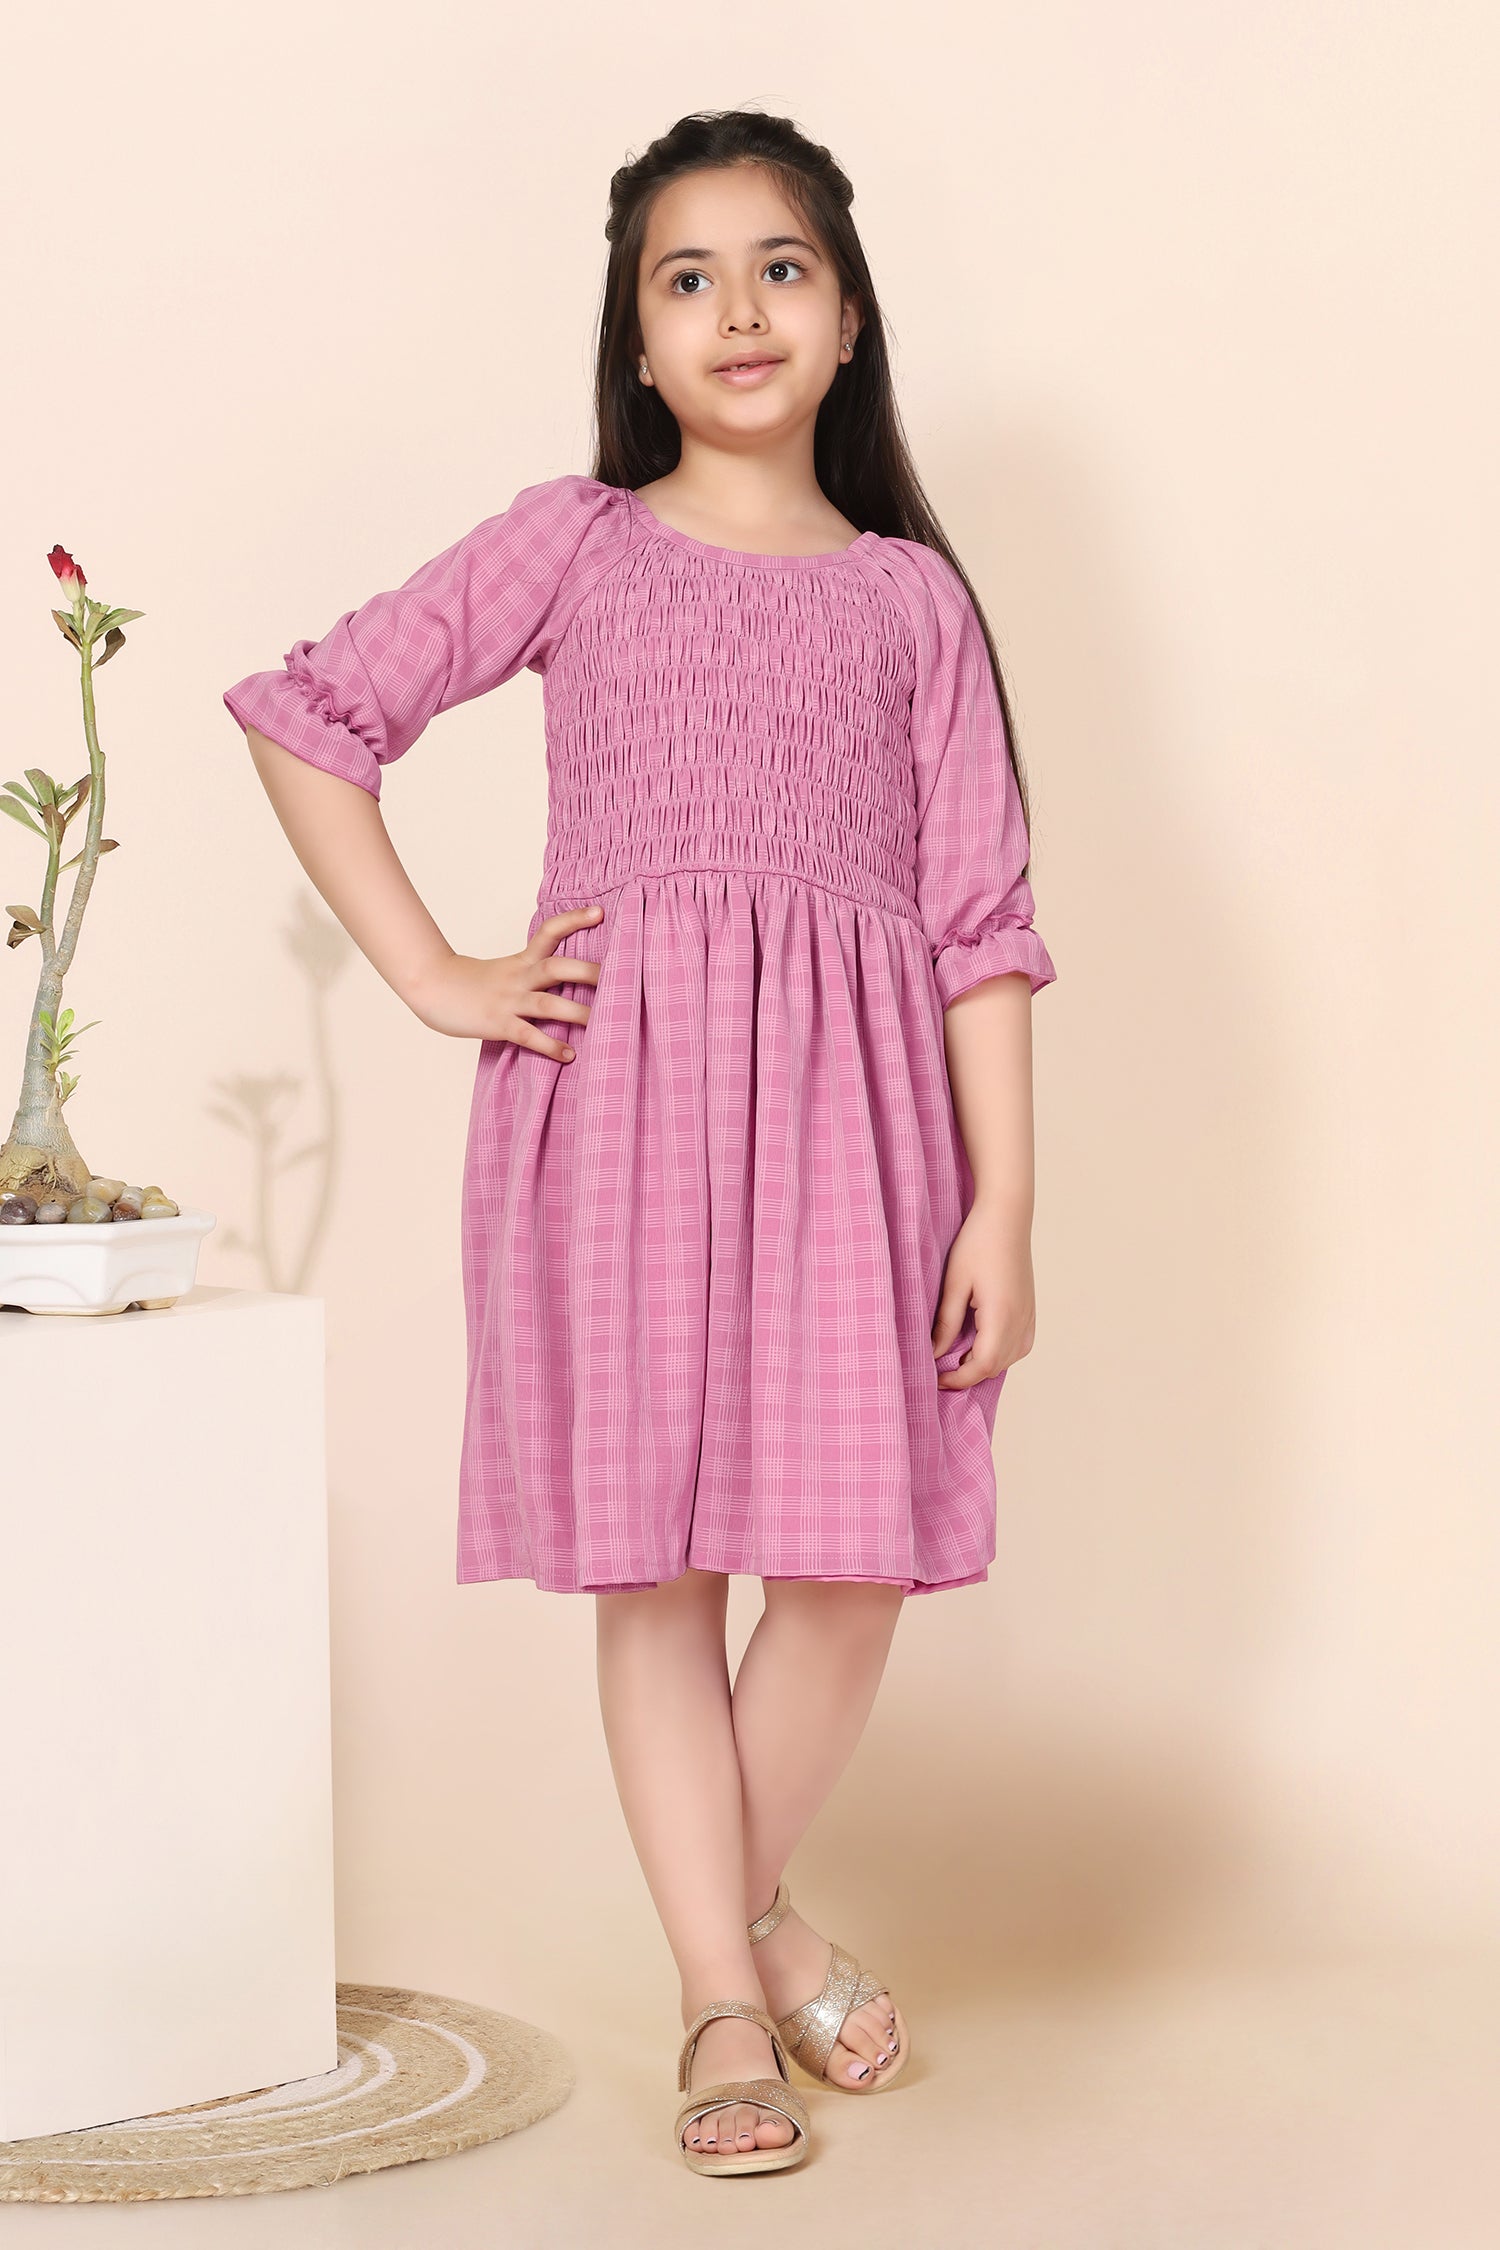 Sweet And Cute Pink Princess Party Smock Dress For Teen Girls Summer Doll  Collar Smock Dress, Sizes 6 14 Years 210303 From Bai08, $15.06 | DHgate.Com